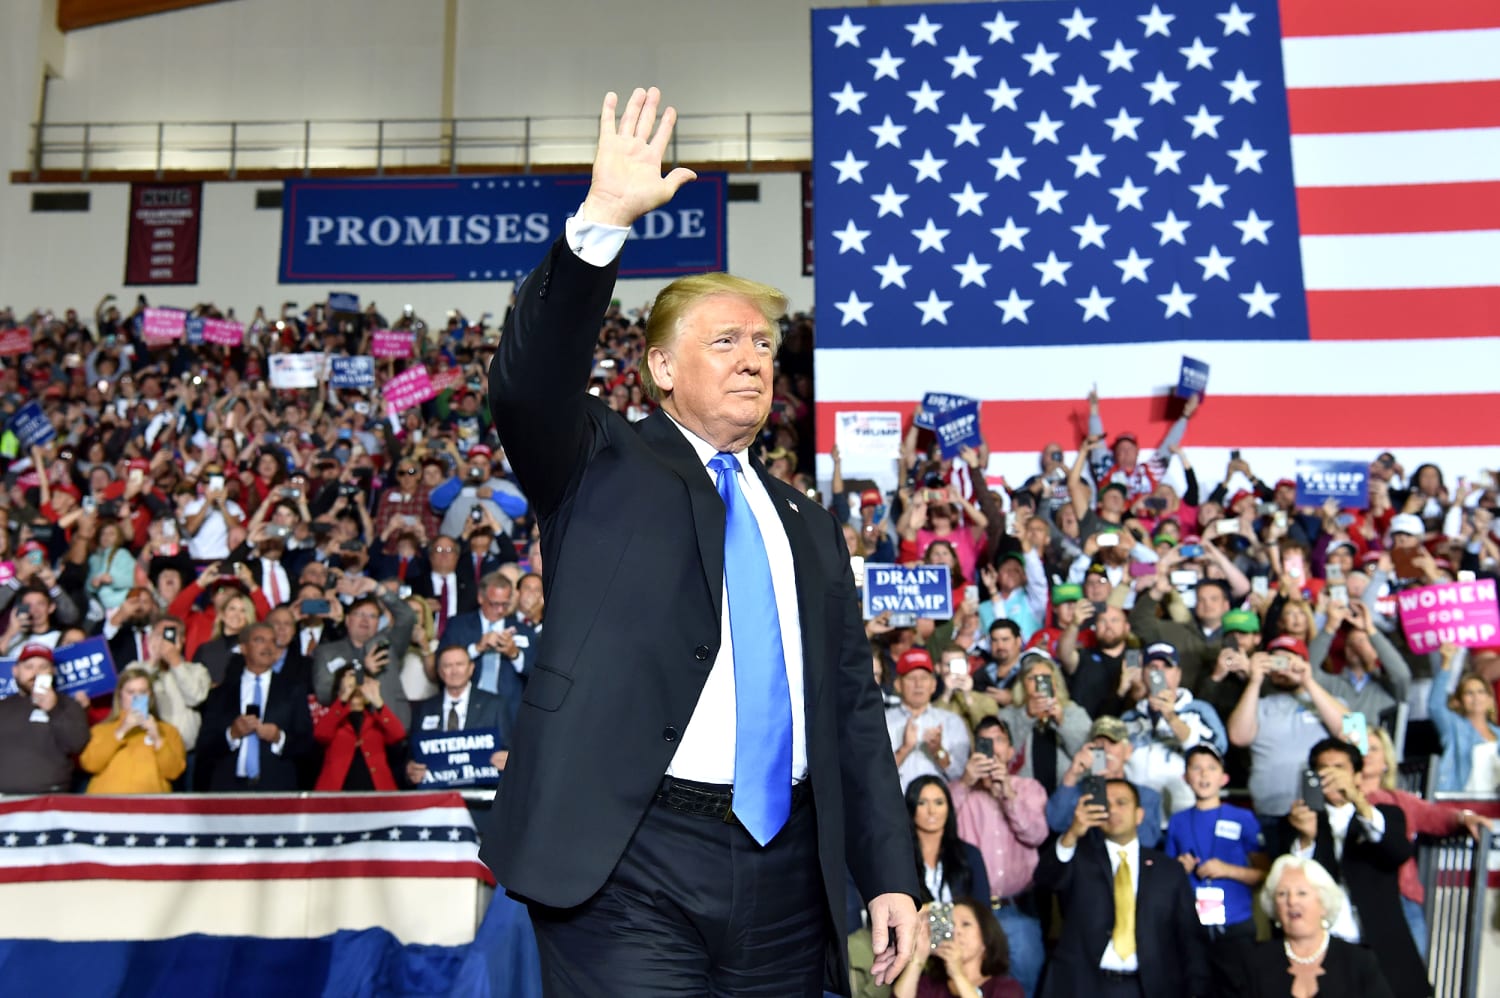 Trump tops $100 million raised for his 2020 re-election campaign